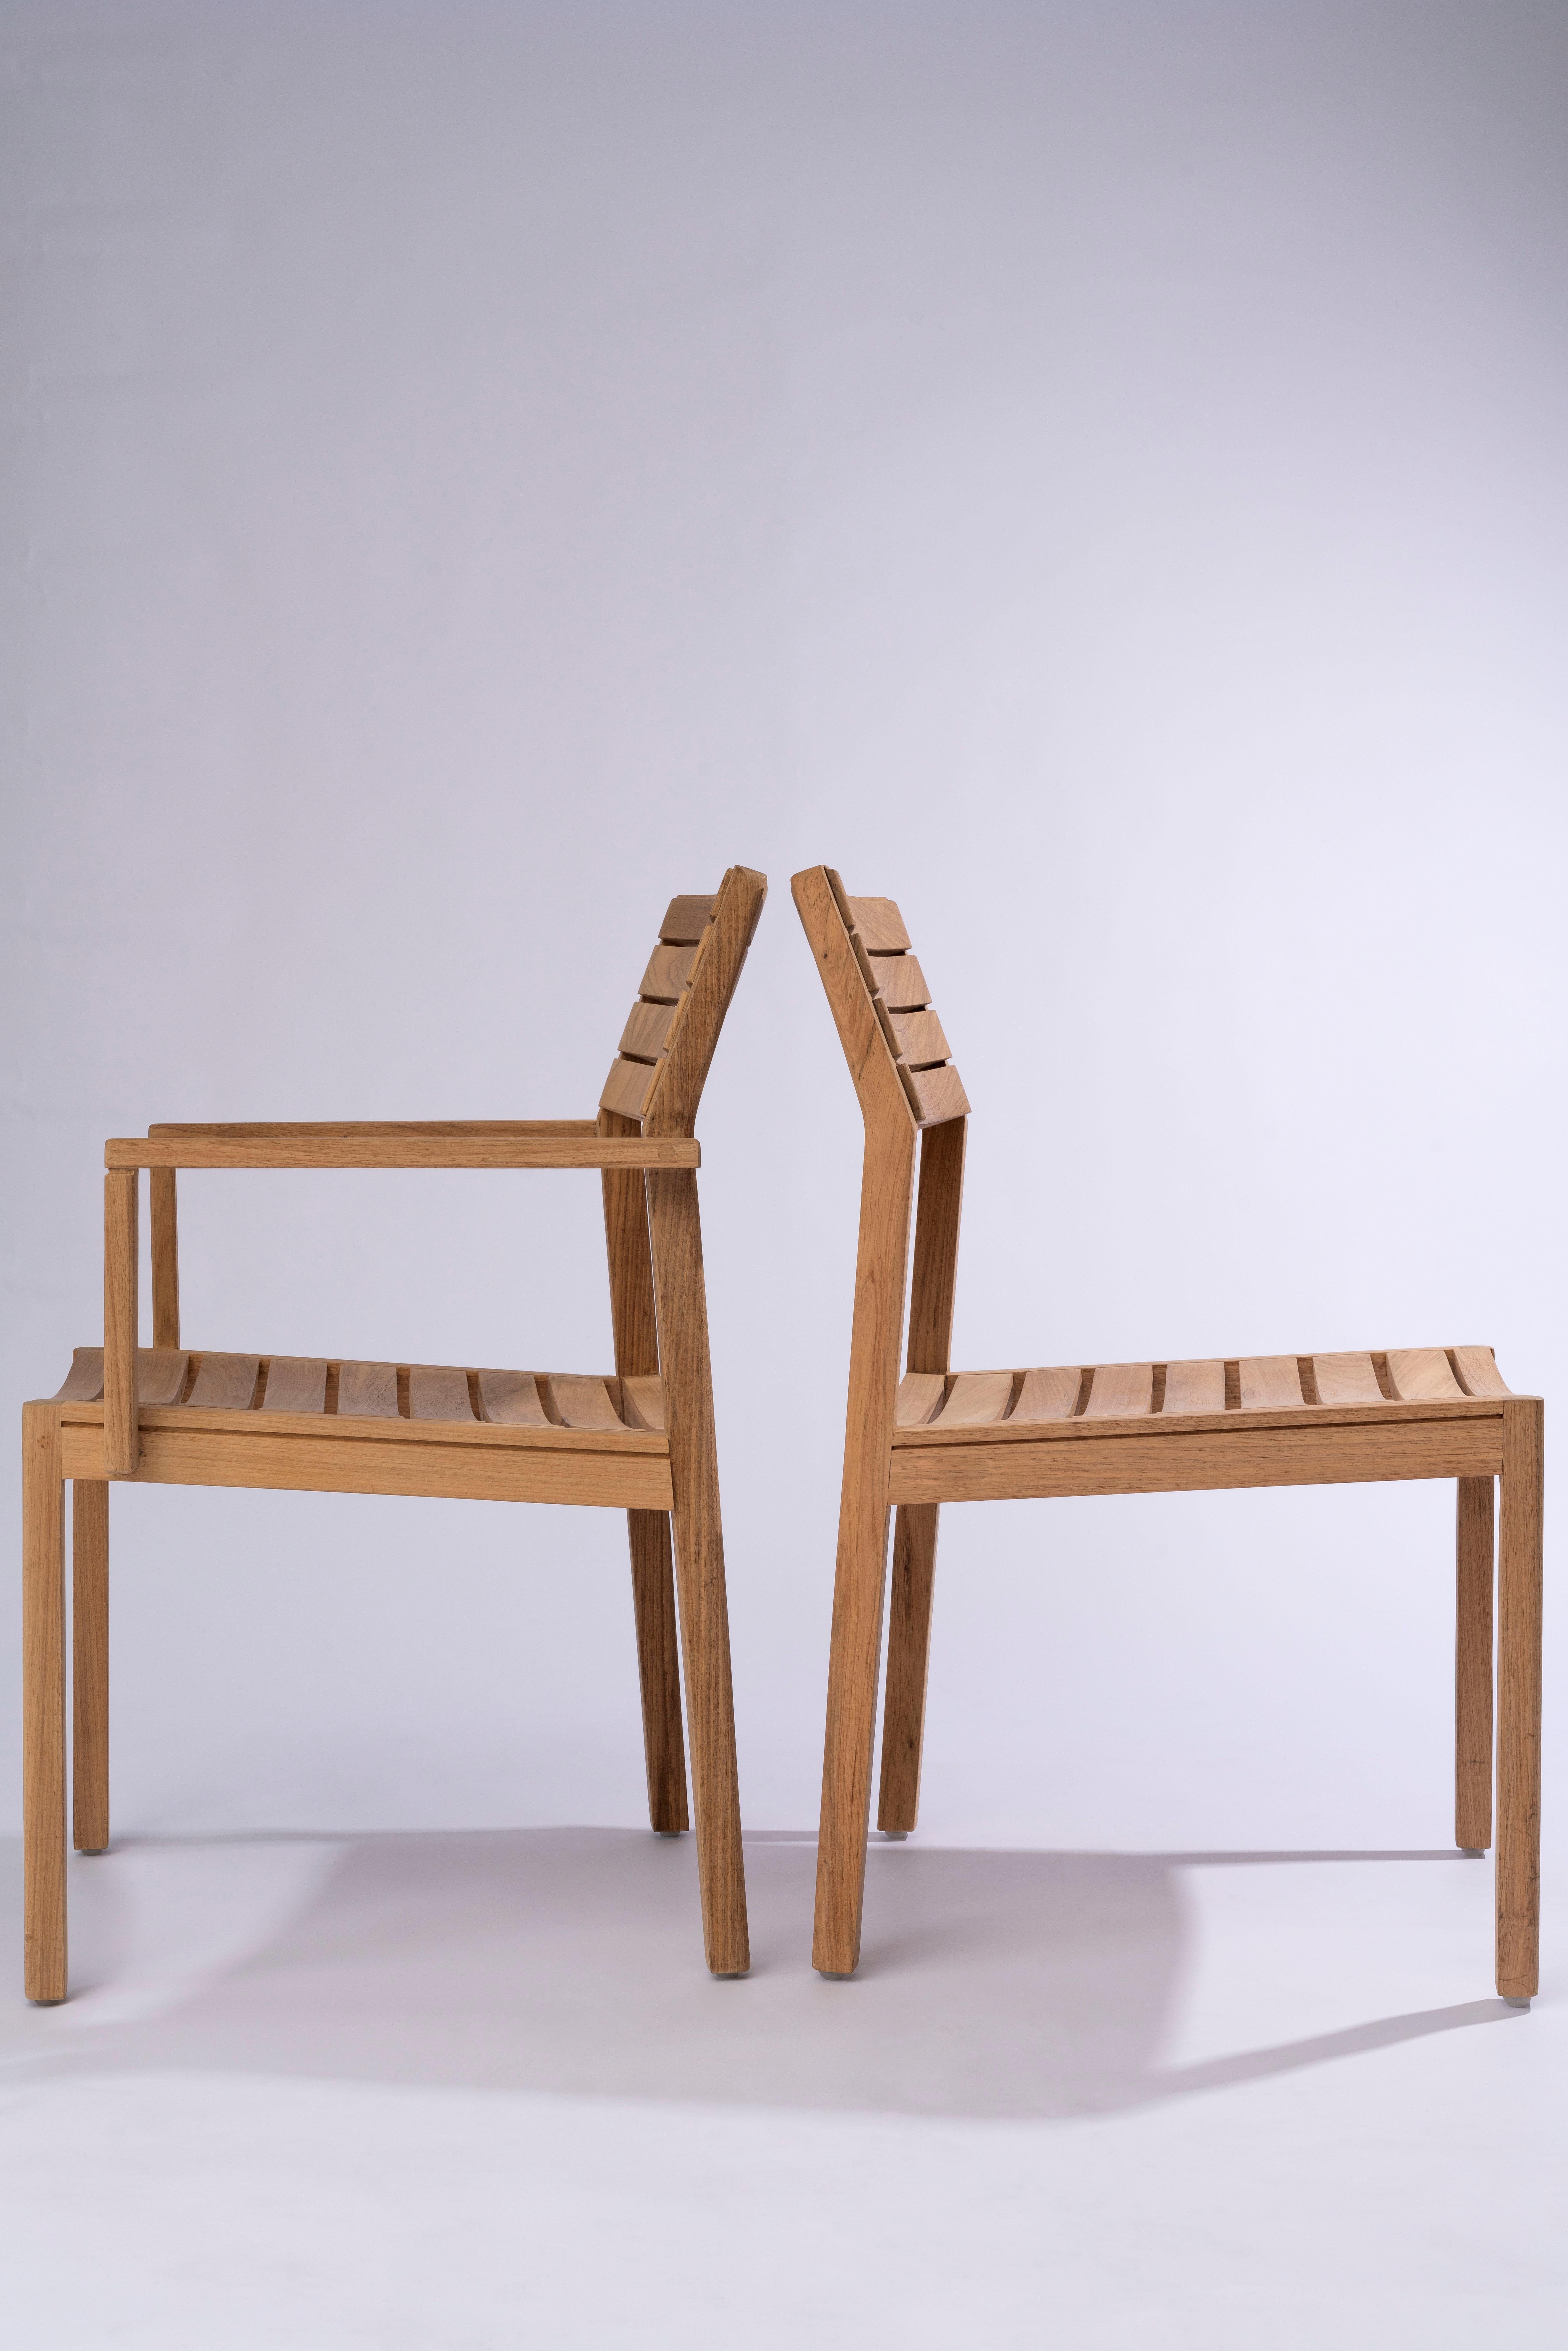 Modern Solid Wood Chair in Teak, with Wooden Slats, for the Outside, Outdoor Resistant  For Sale